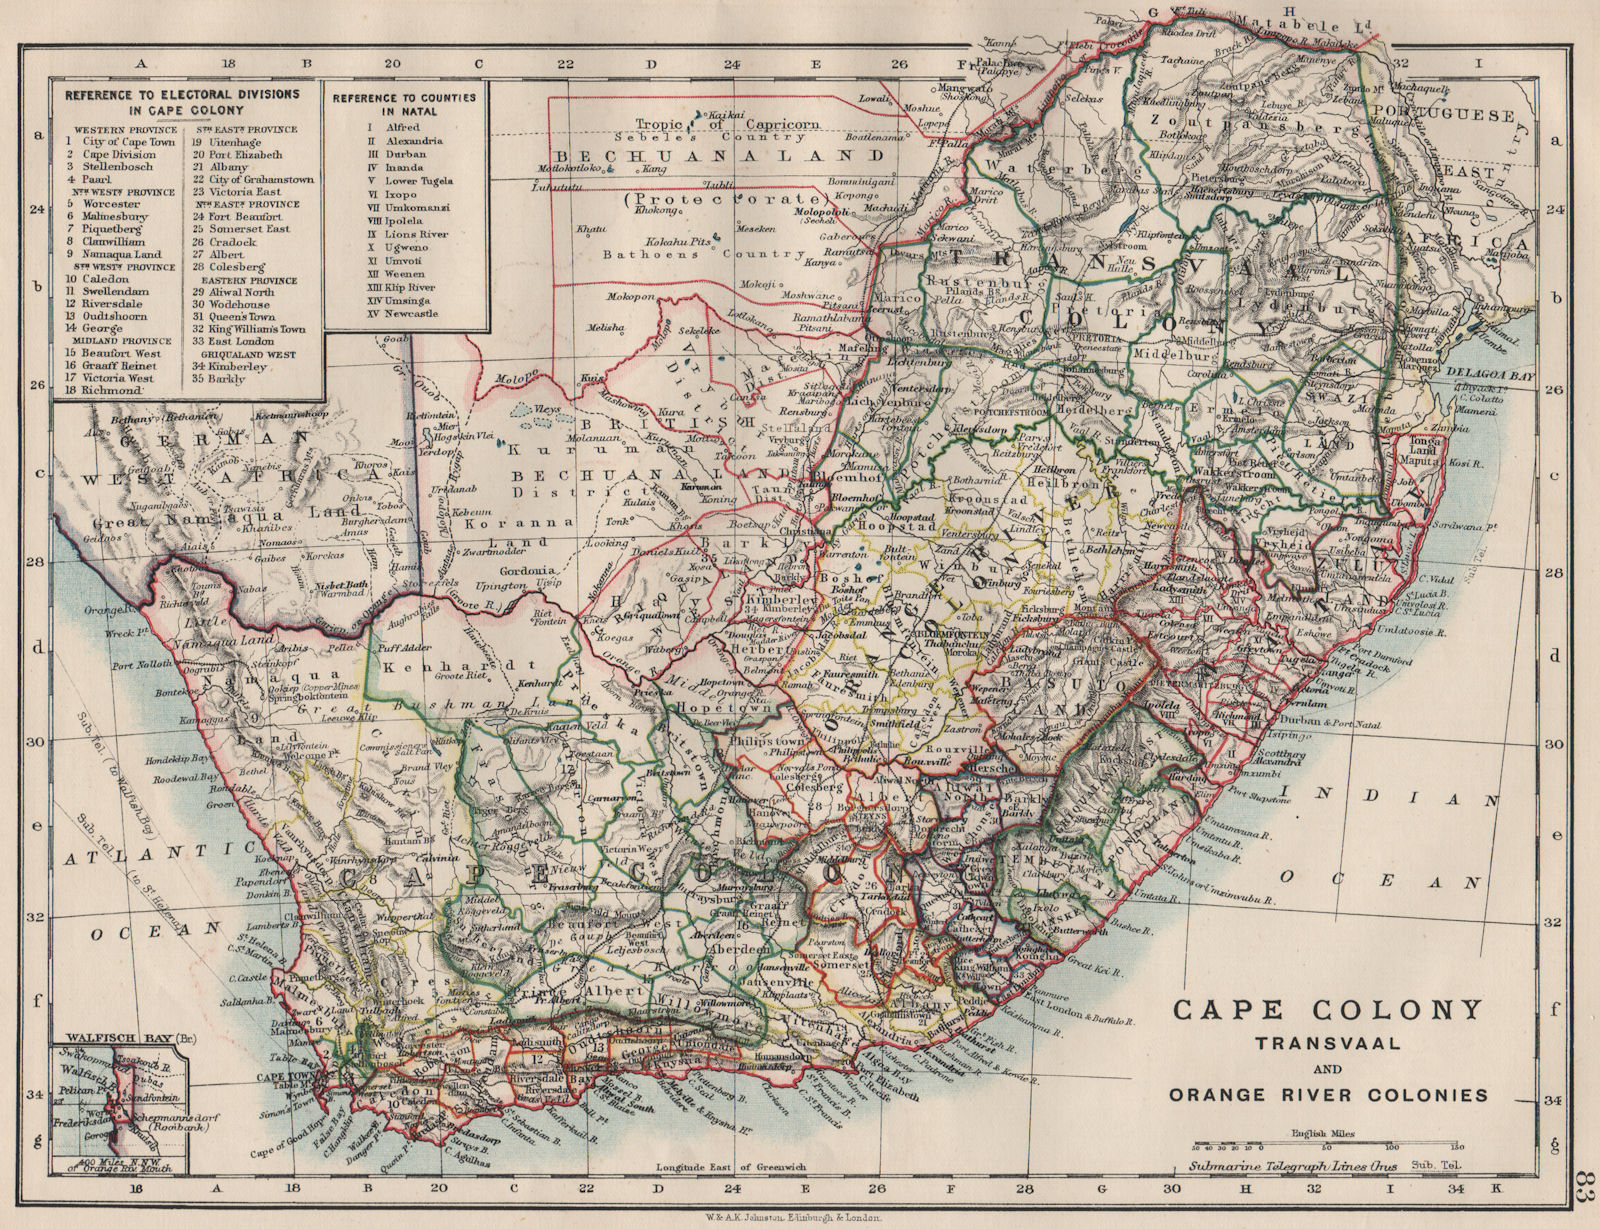 COLONIAL SOUTH AFRICA. Cape Colony. Orange River Colony. Transvaal 1900 map